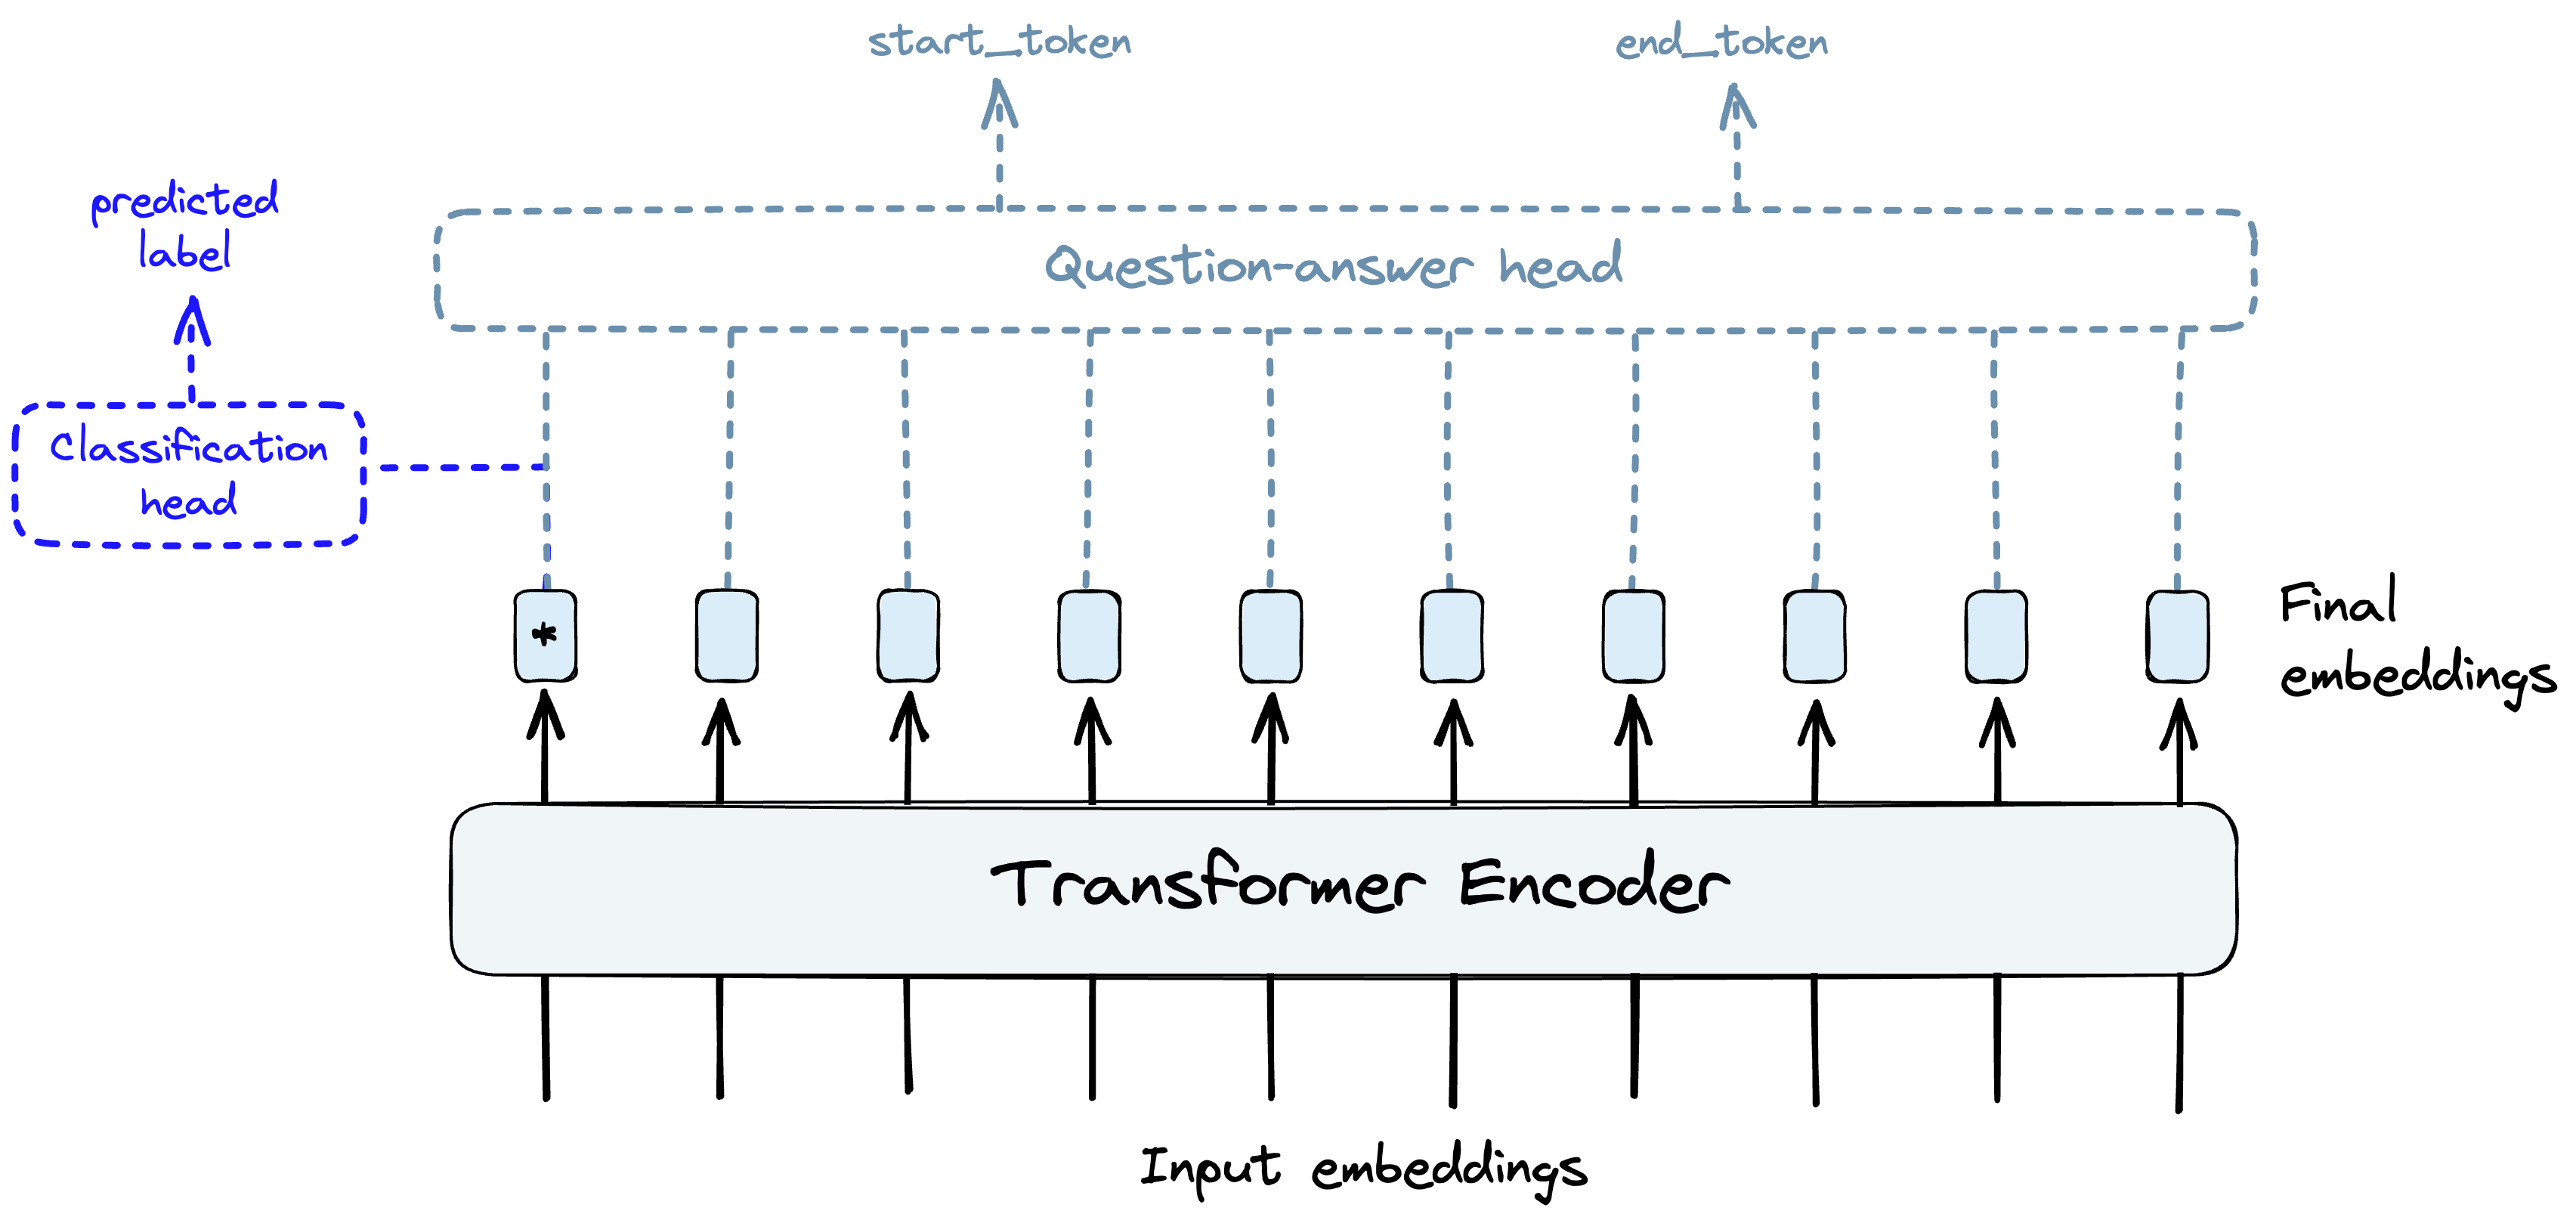 Example of a transformer encoder building information-rich final embeddings before passing these on to a task-specific “head”.